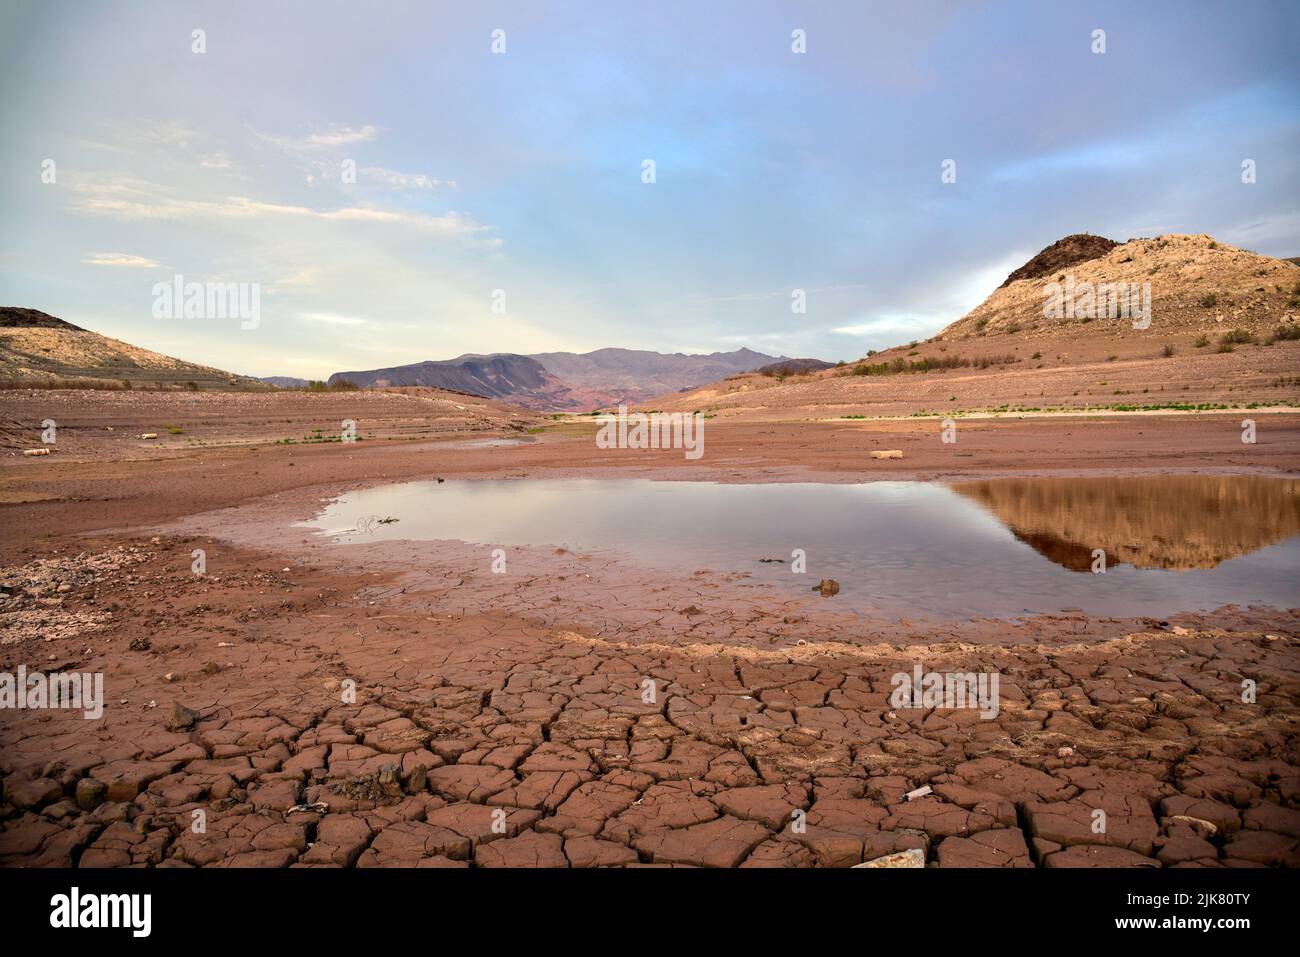 July 30, 2022, Lake Mead, Nevada, Severe Drought Conditions at Boulder Harbor Boat Launch near Las Vegas. Stock Photo